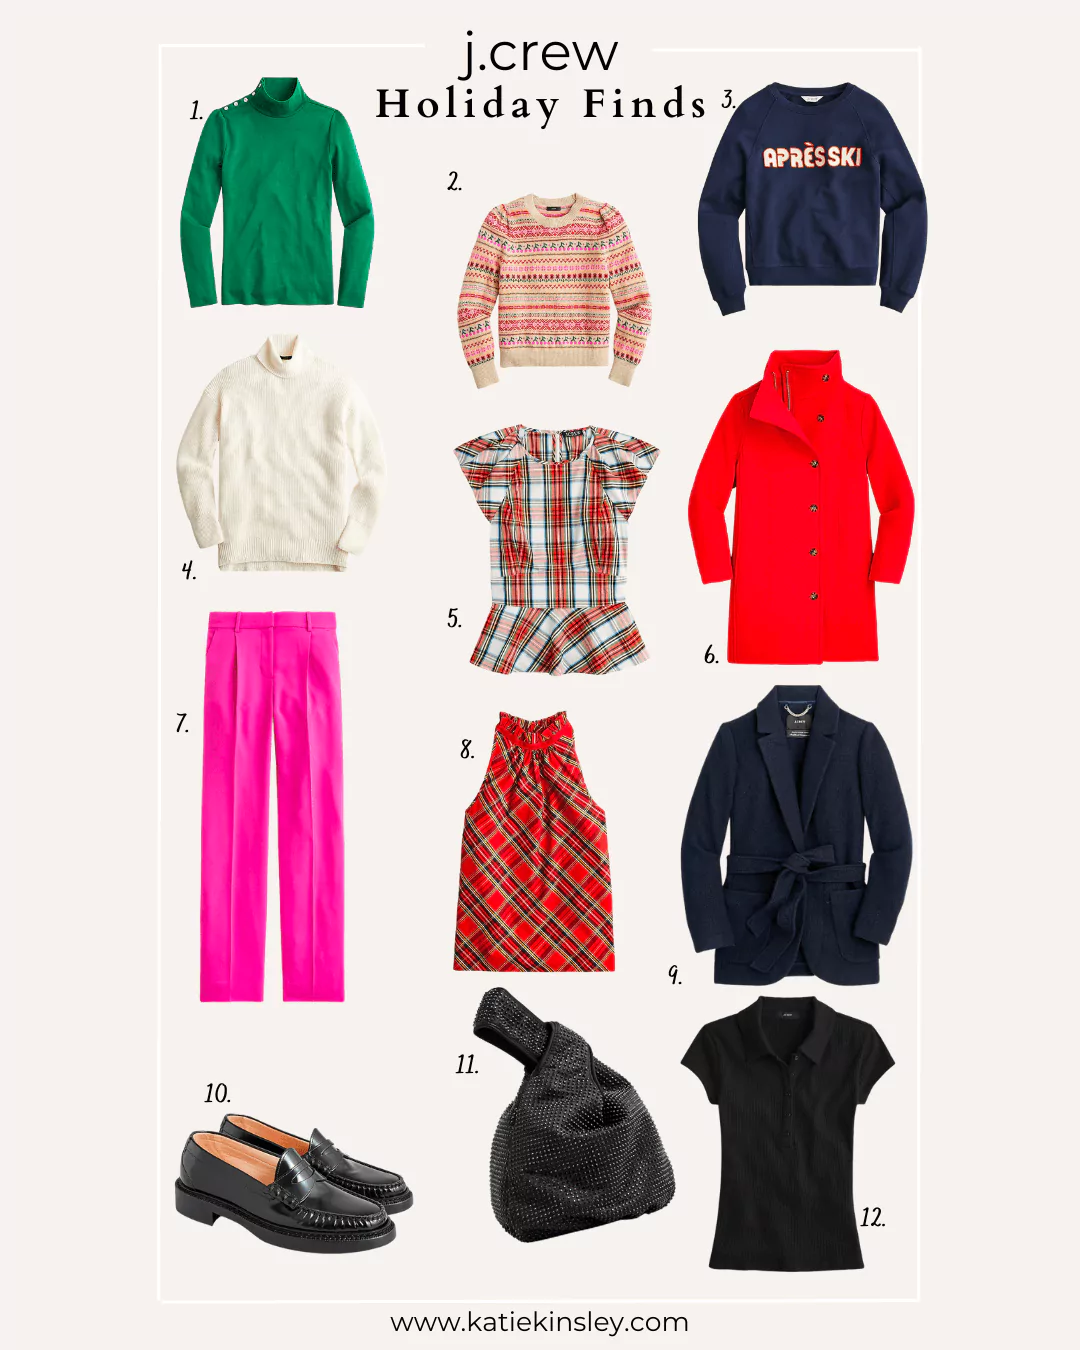 jcrew holiday finds